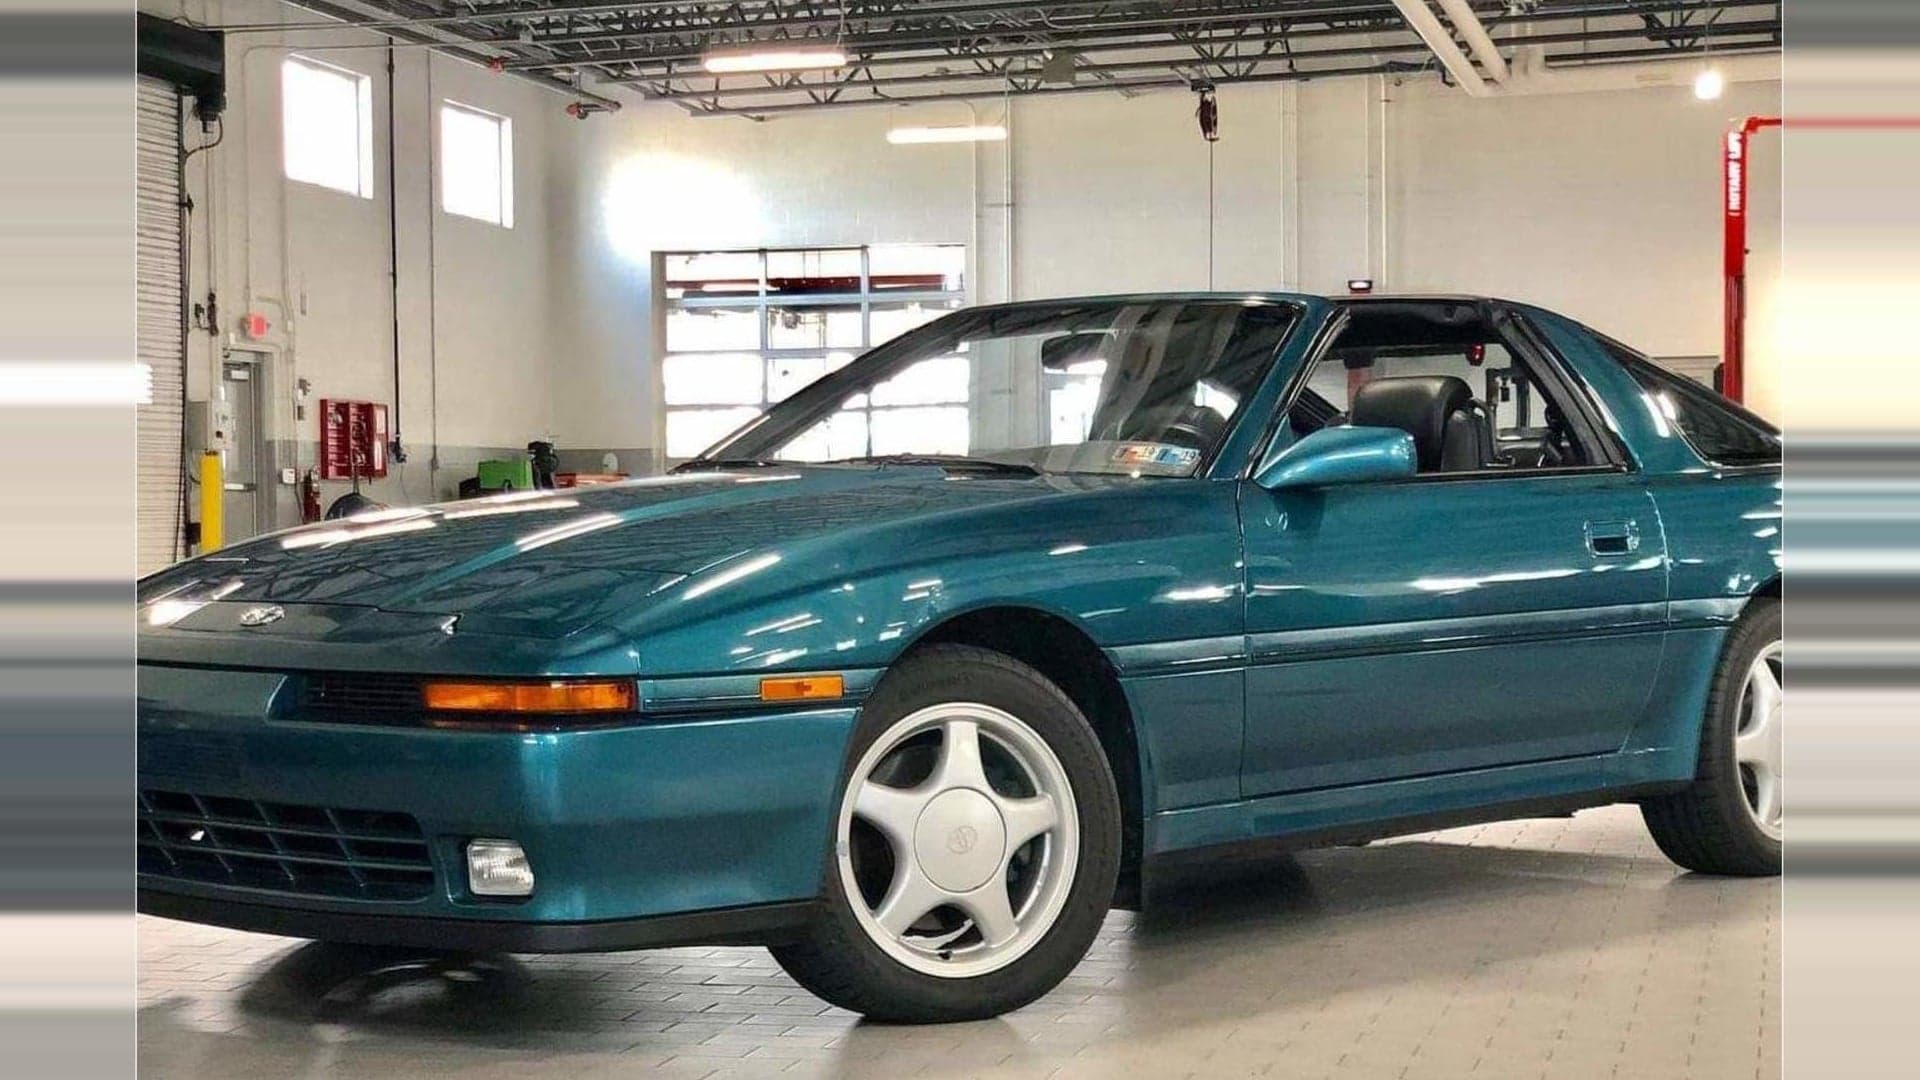 Perfect Teal Metallic Mk3 Manual Toyota Supra Turbo is Traded in for…a Crossover